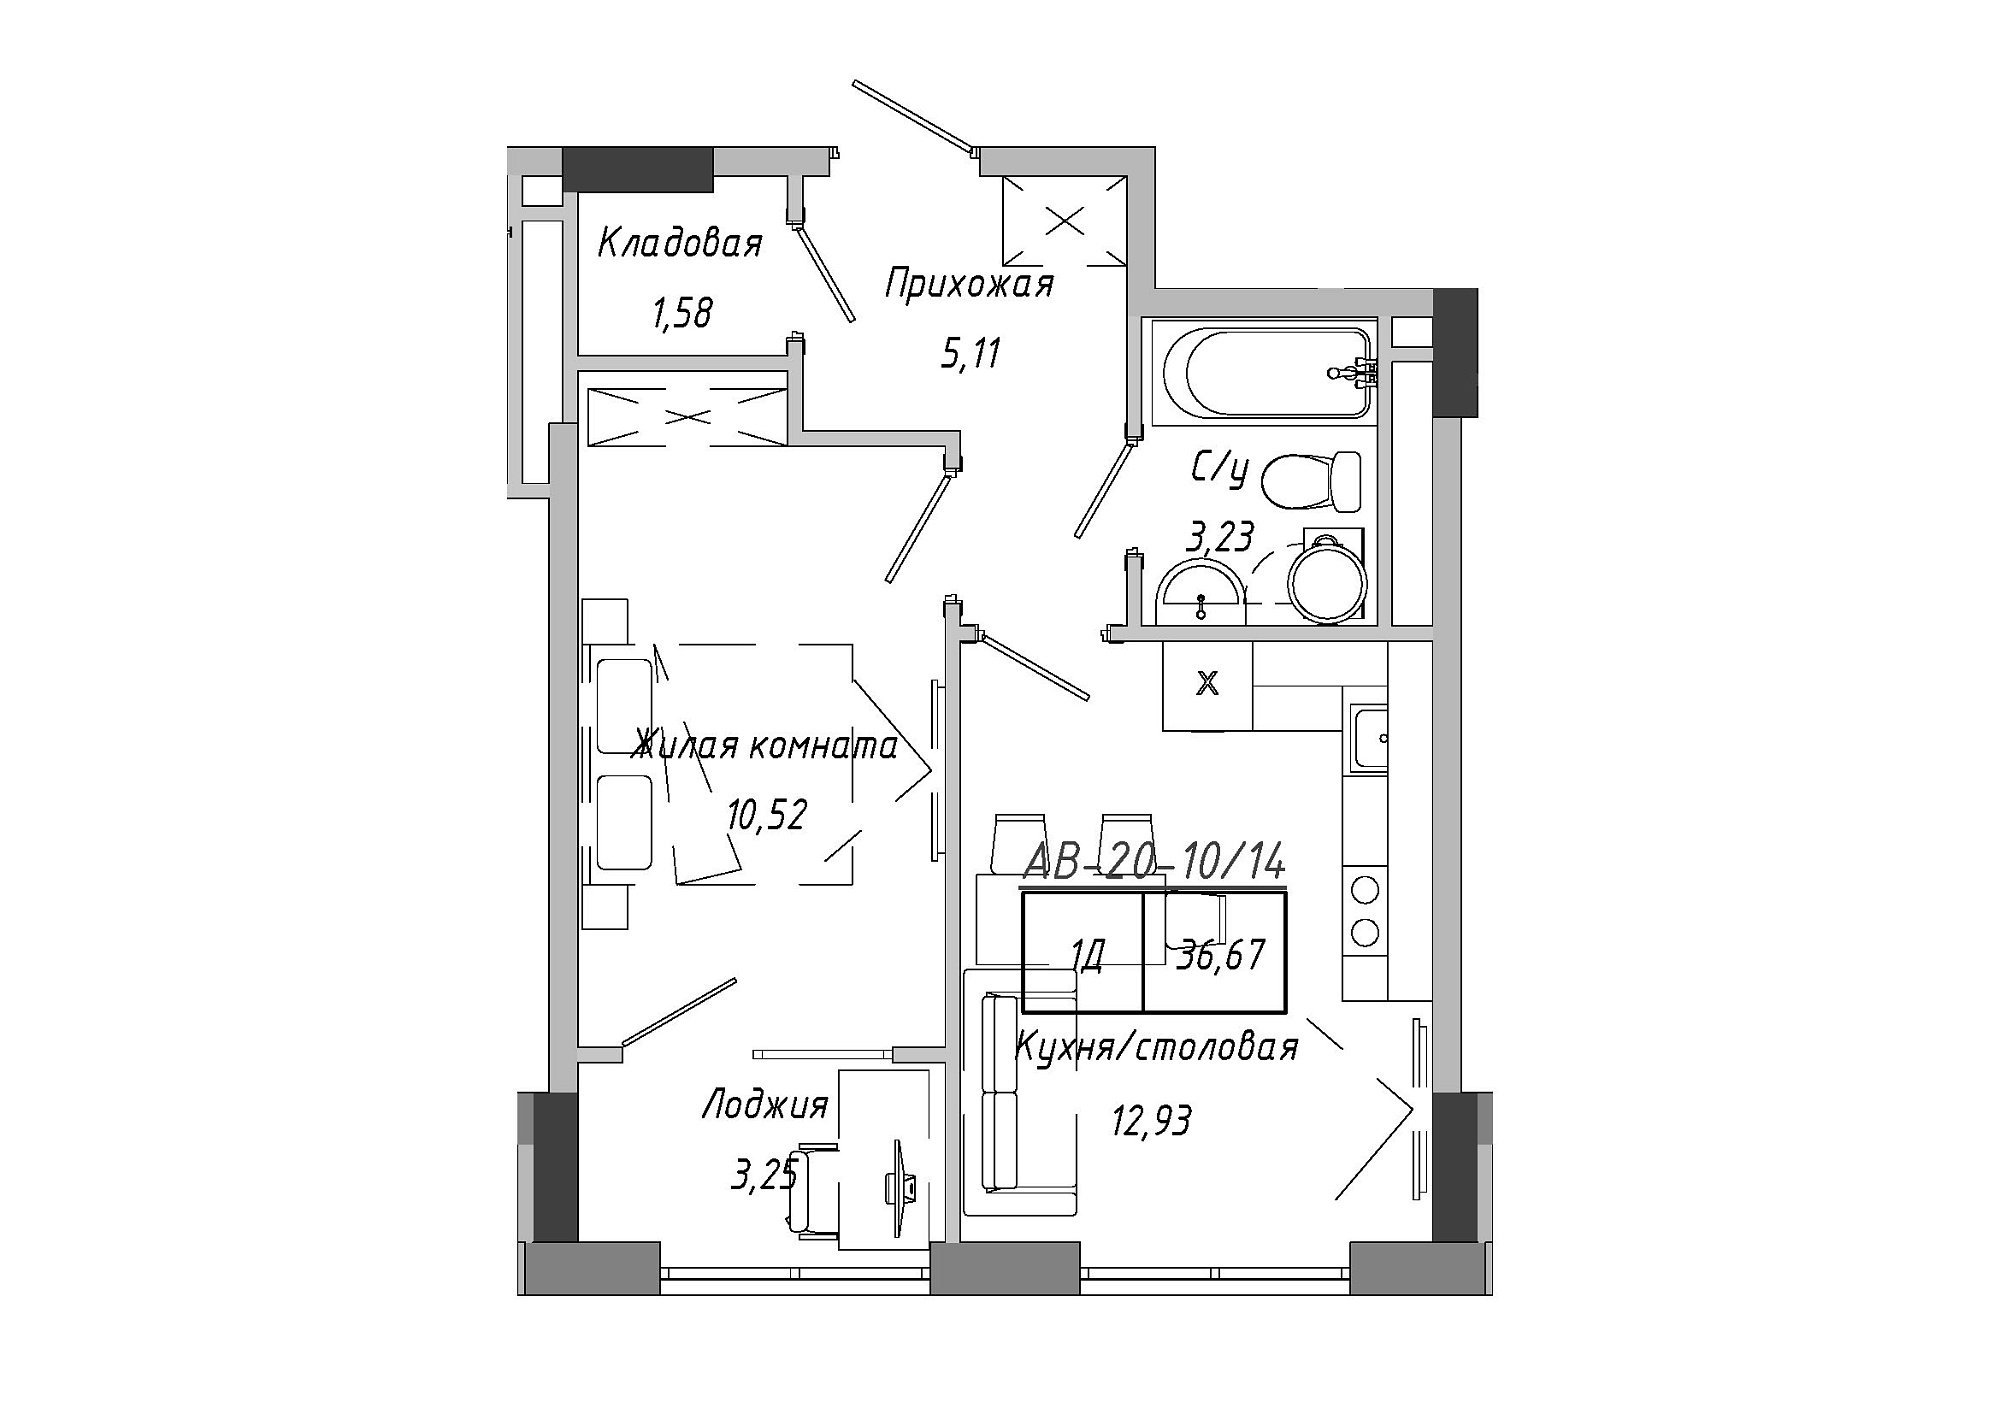 Planning 1-rm flats area 36.96m2, AB-20-10/00014.